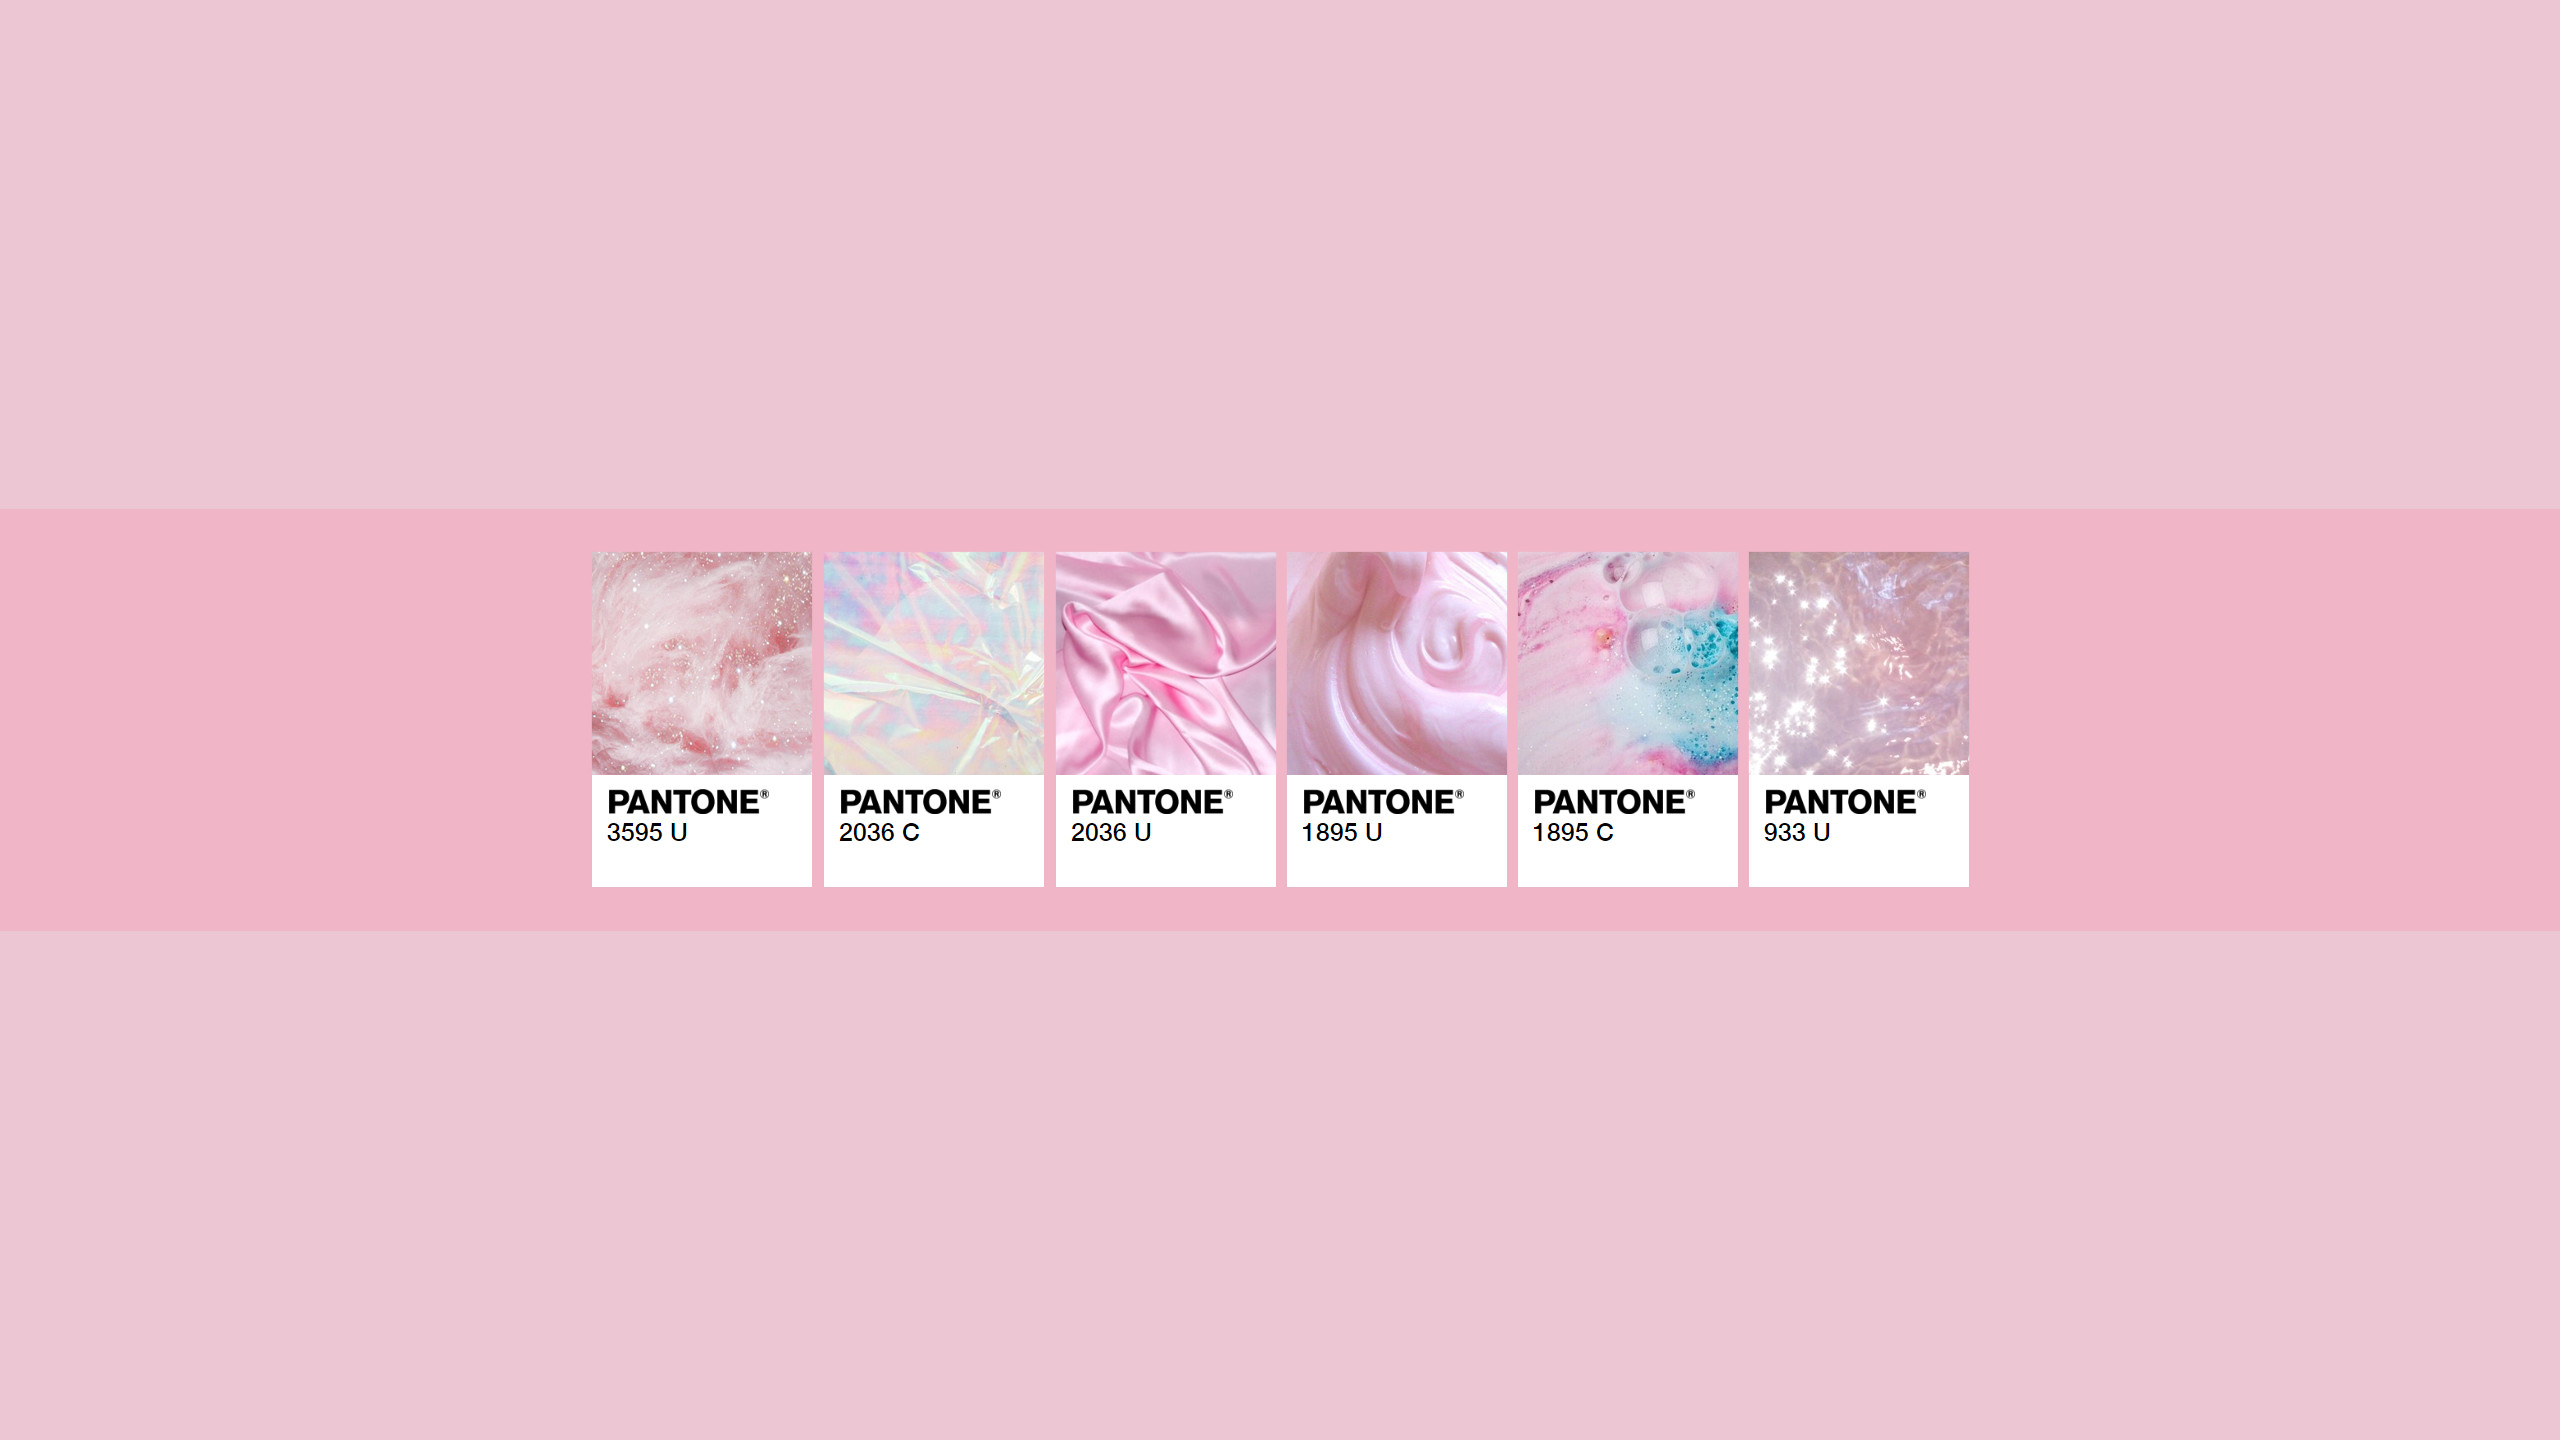 2560x1440 pantone youtube banner template [psd] by iheartpink-rachel .